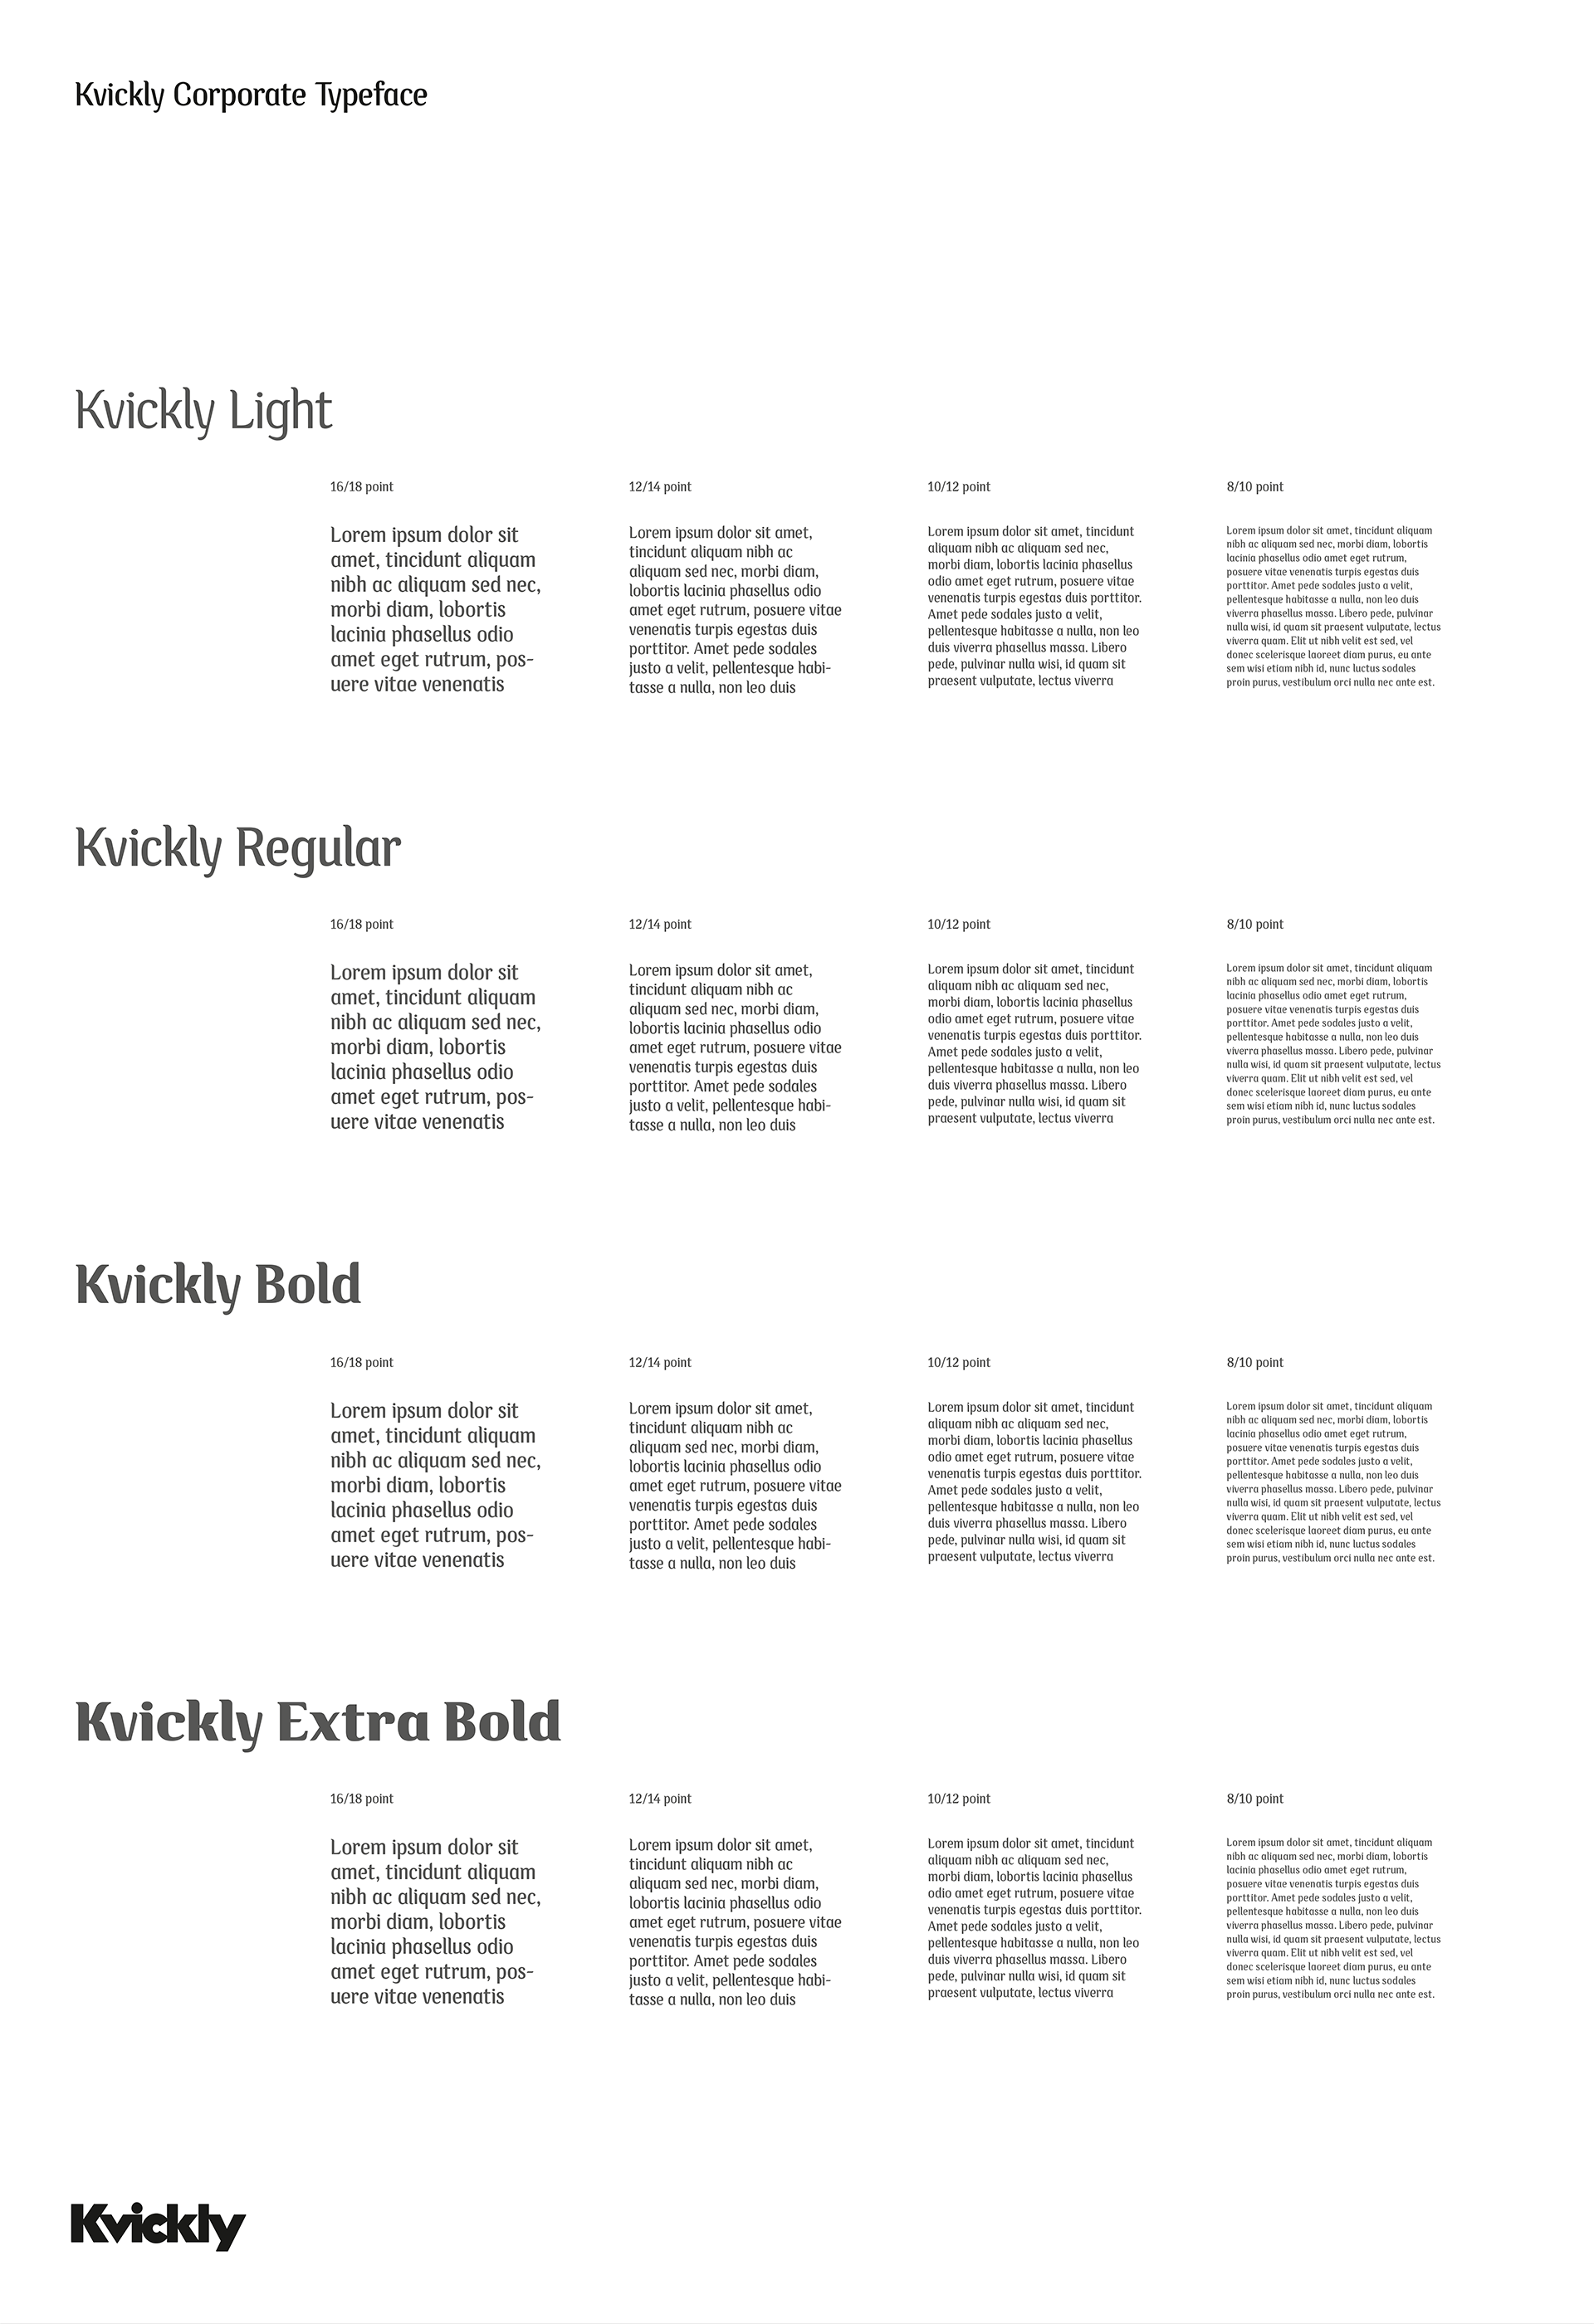 Kvickly typography guide by LOOP Associates